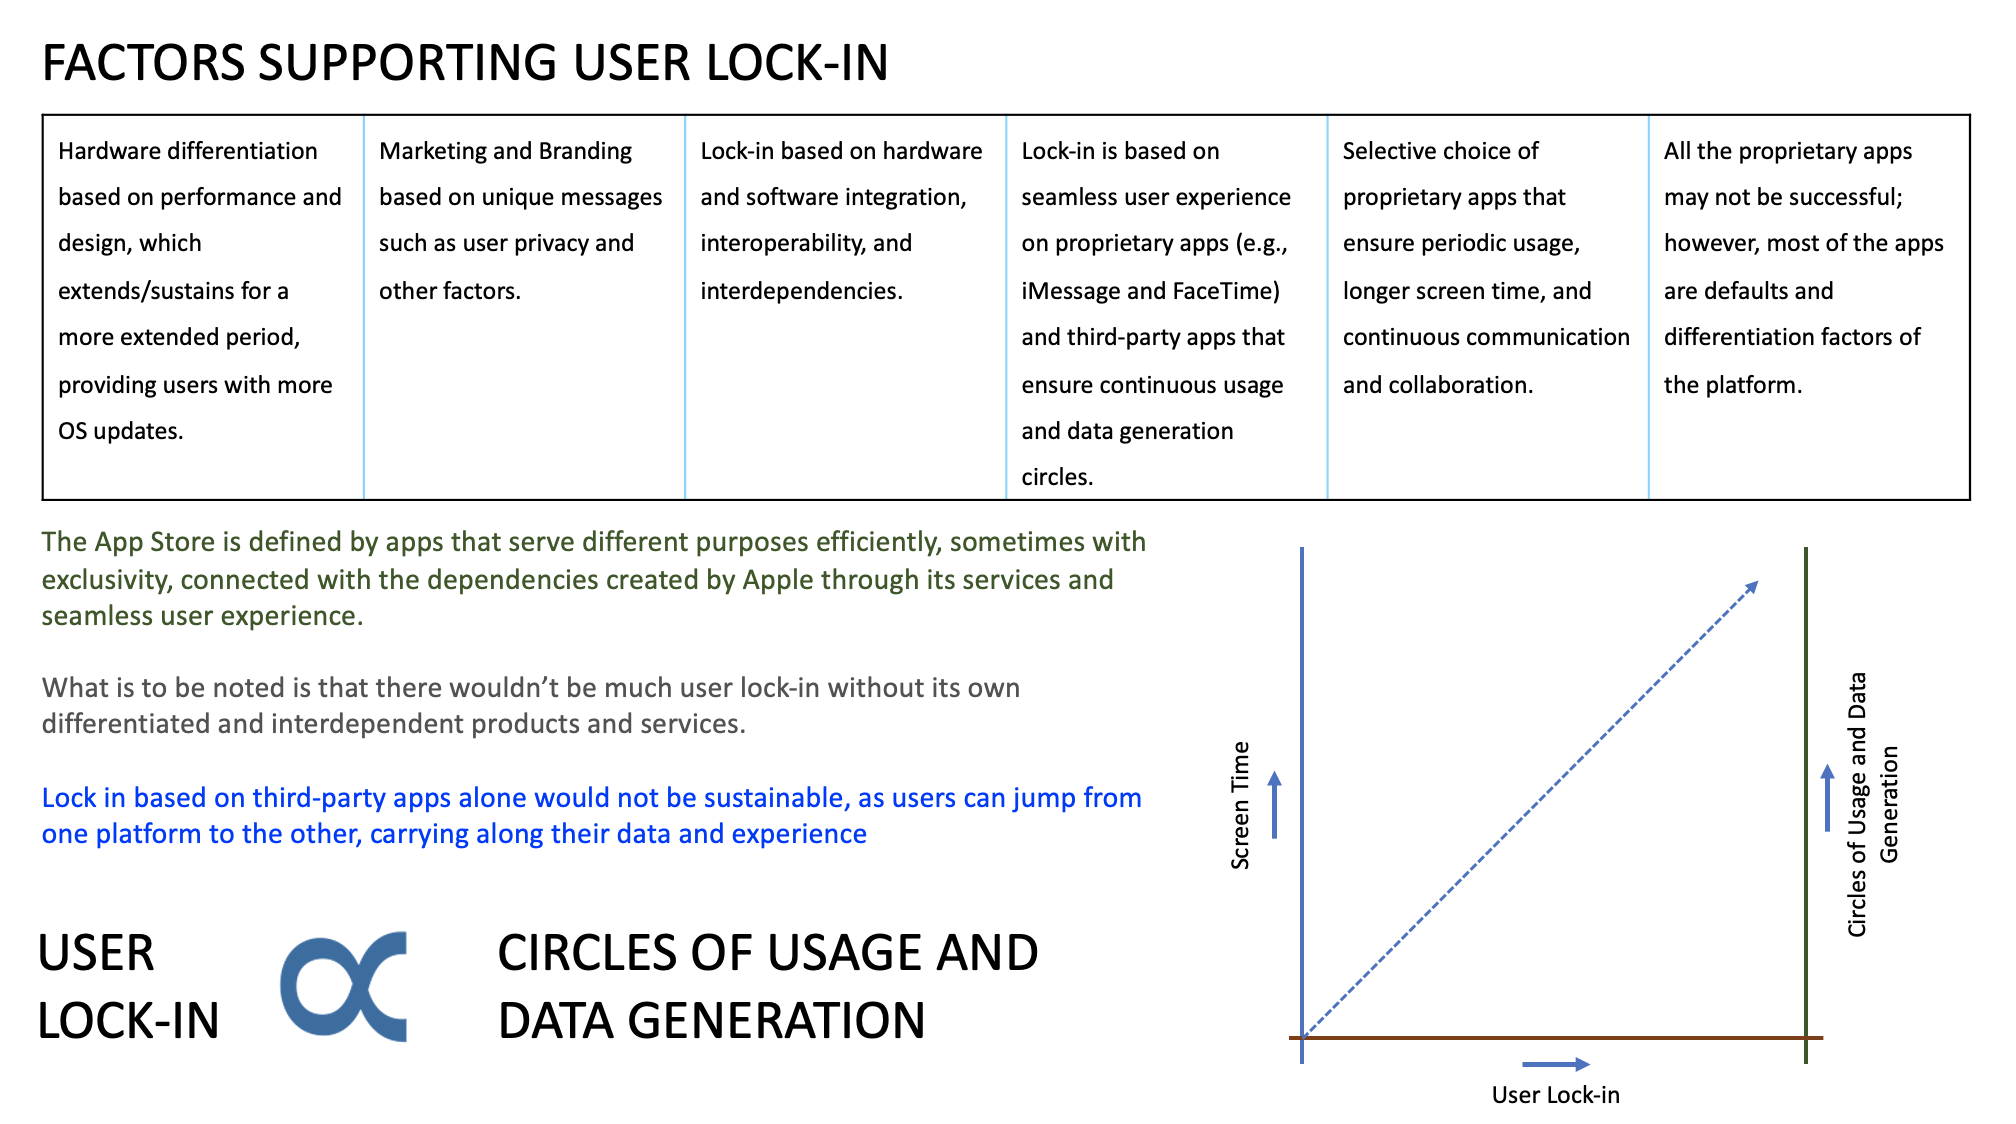 Apple's Differentiation and User Lock-ins - Factors